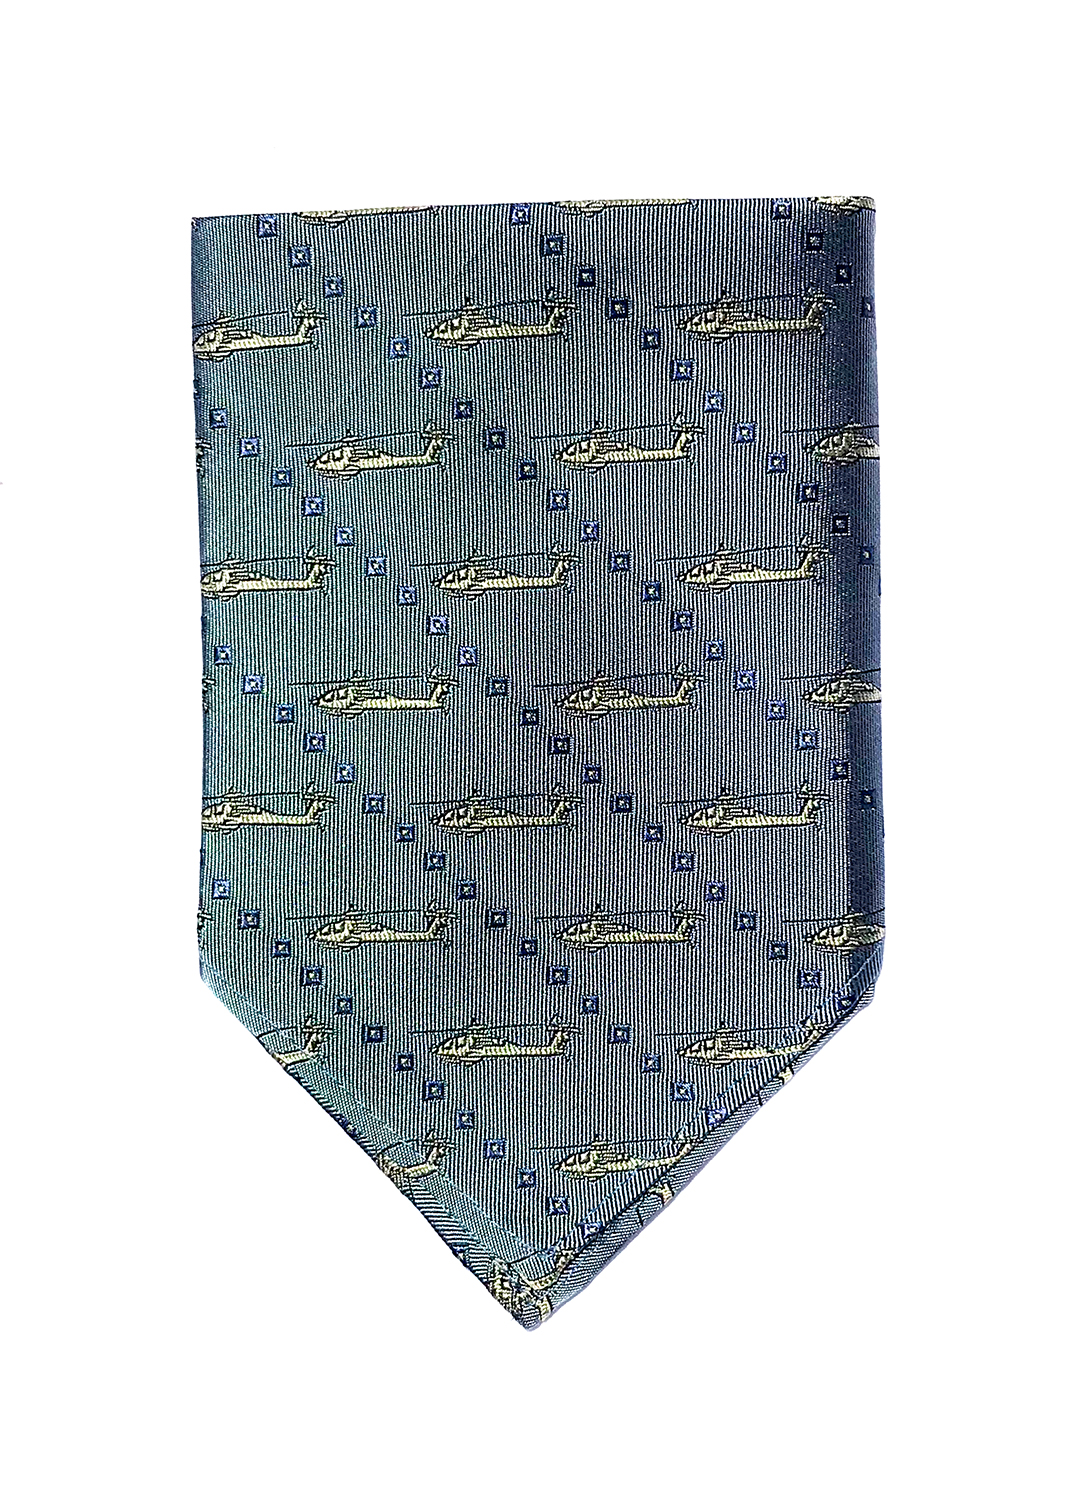 Apache Helicopter pocket square in light blue